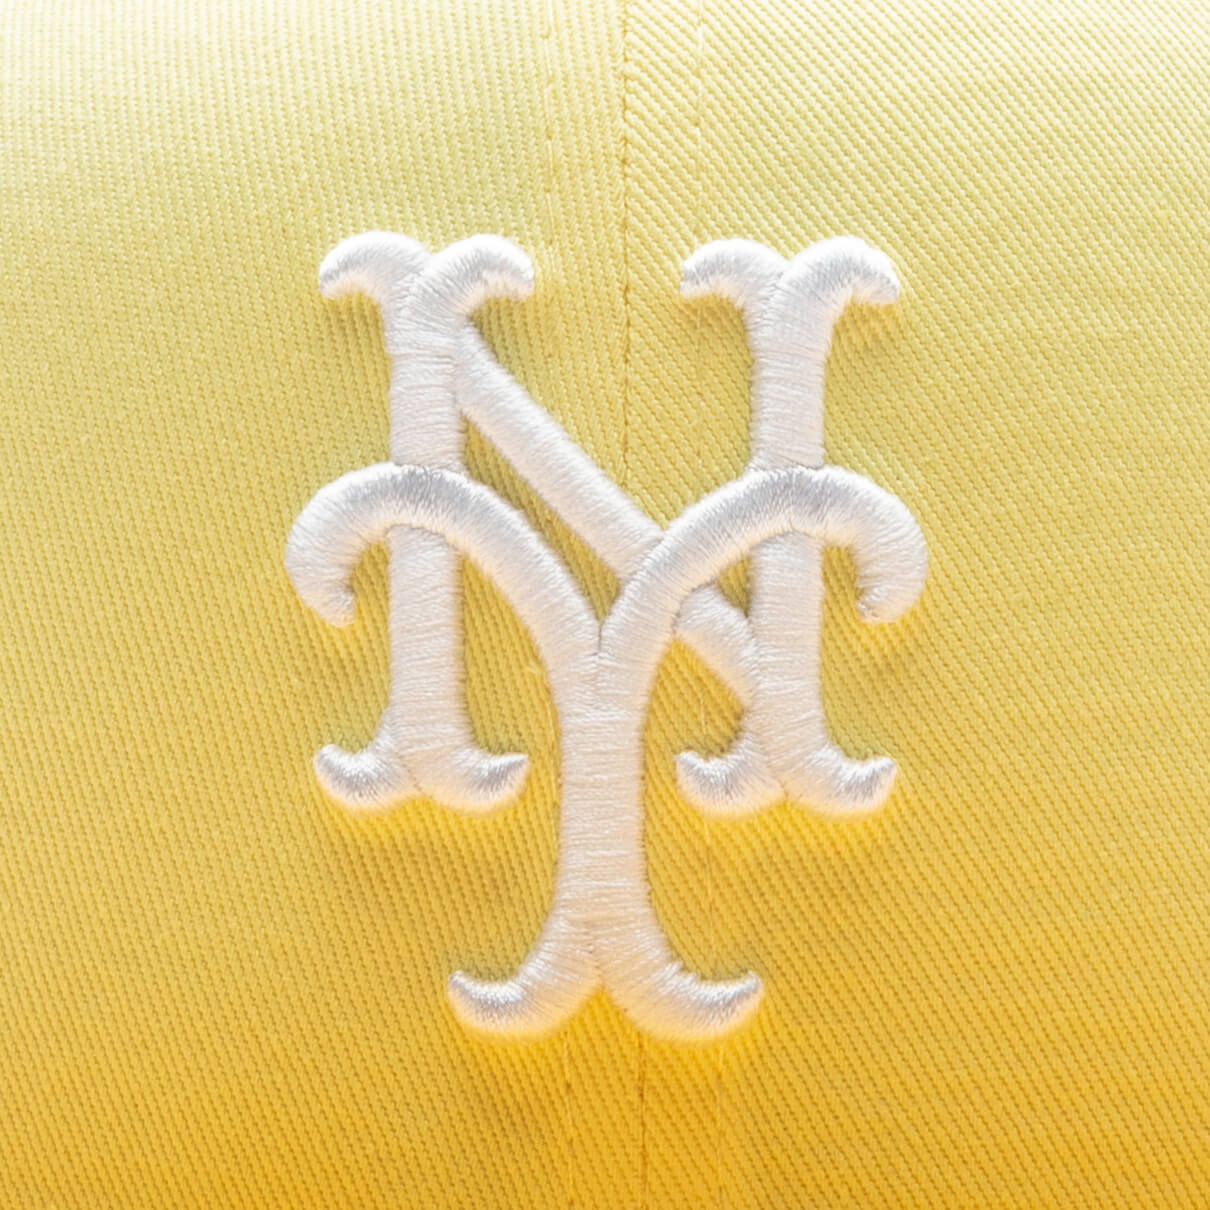 Feature x New Era 59FIFTY Fitted Fruit Pack - New York Mets